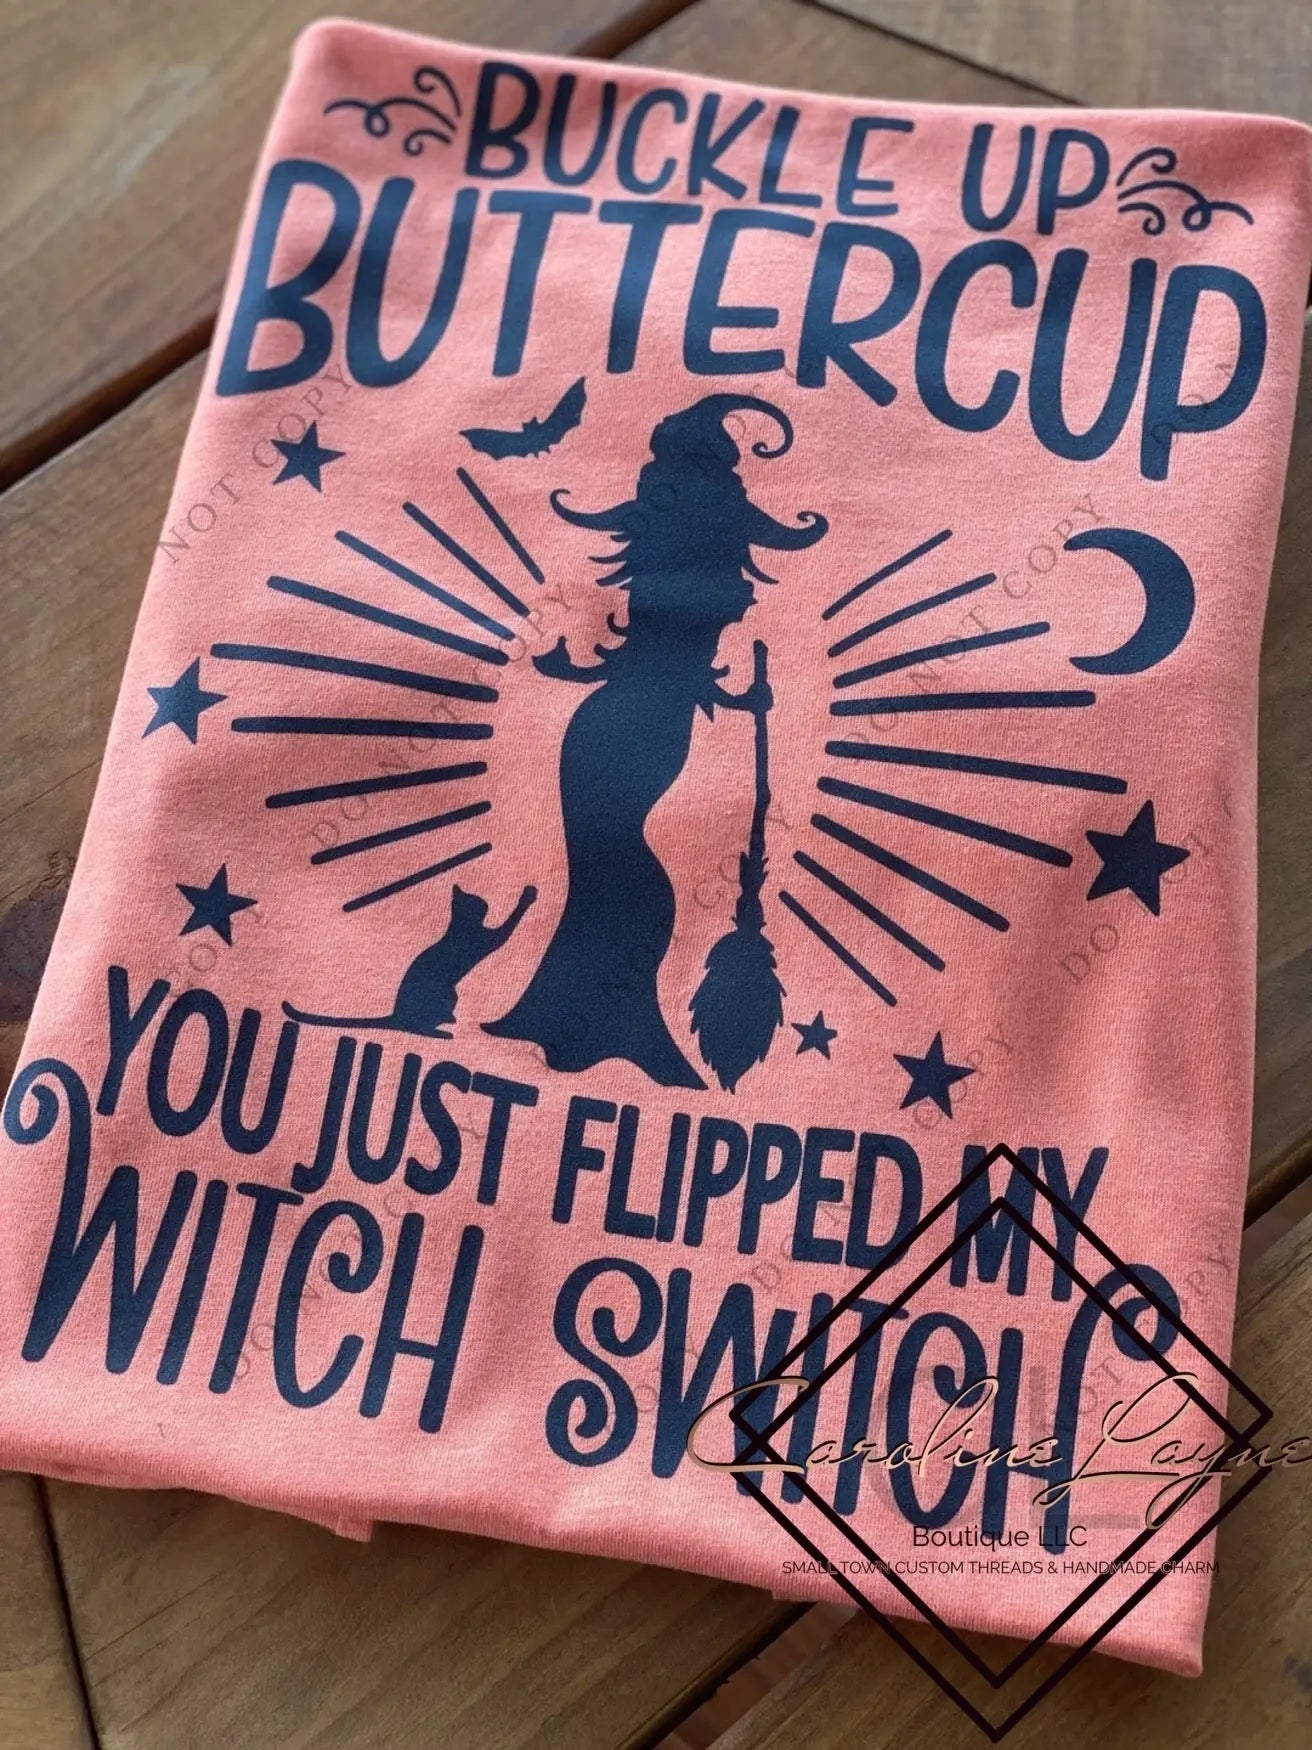 Buckle Up Buttercup You Just Flipped My Witch Switch Tee - Caroline Layne Boutique LLC